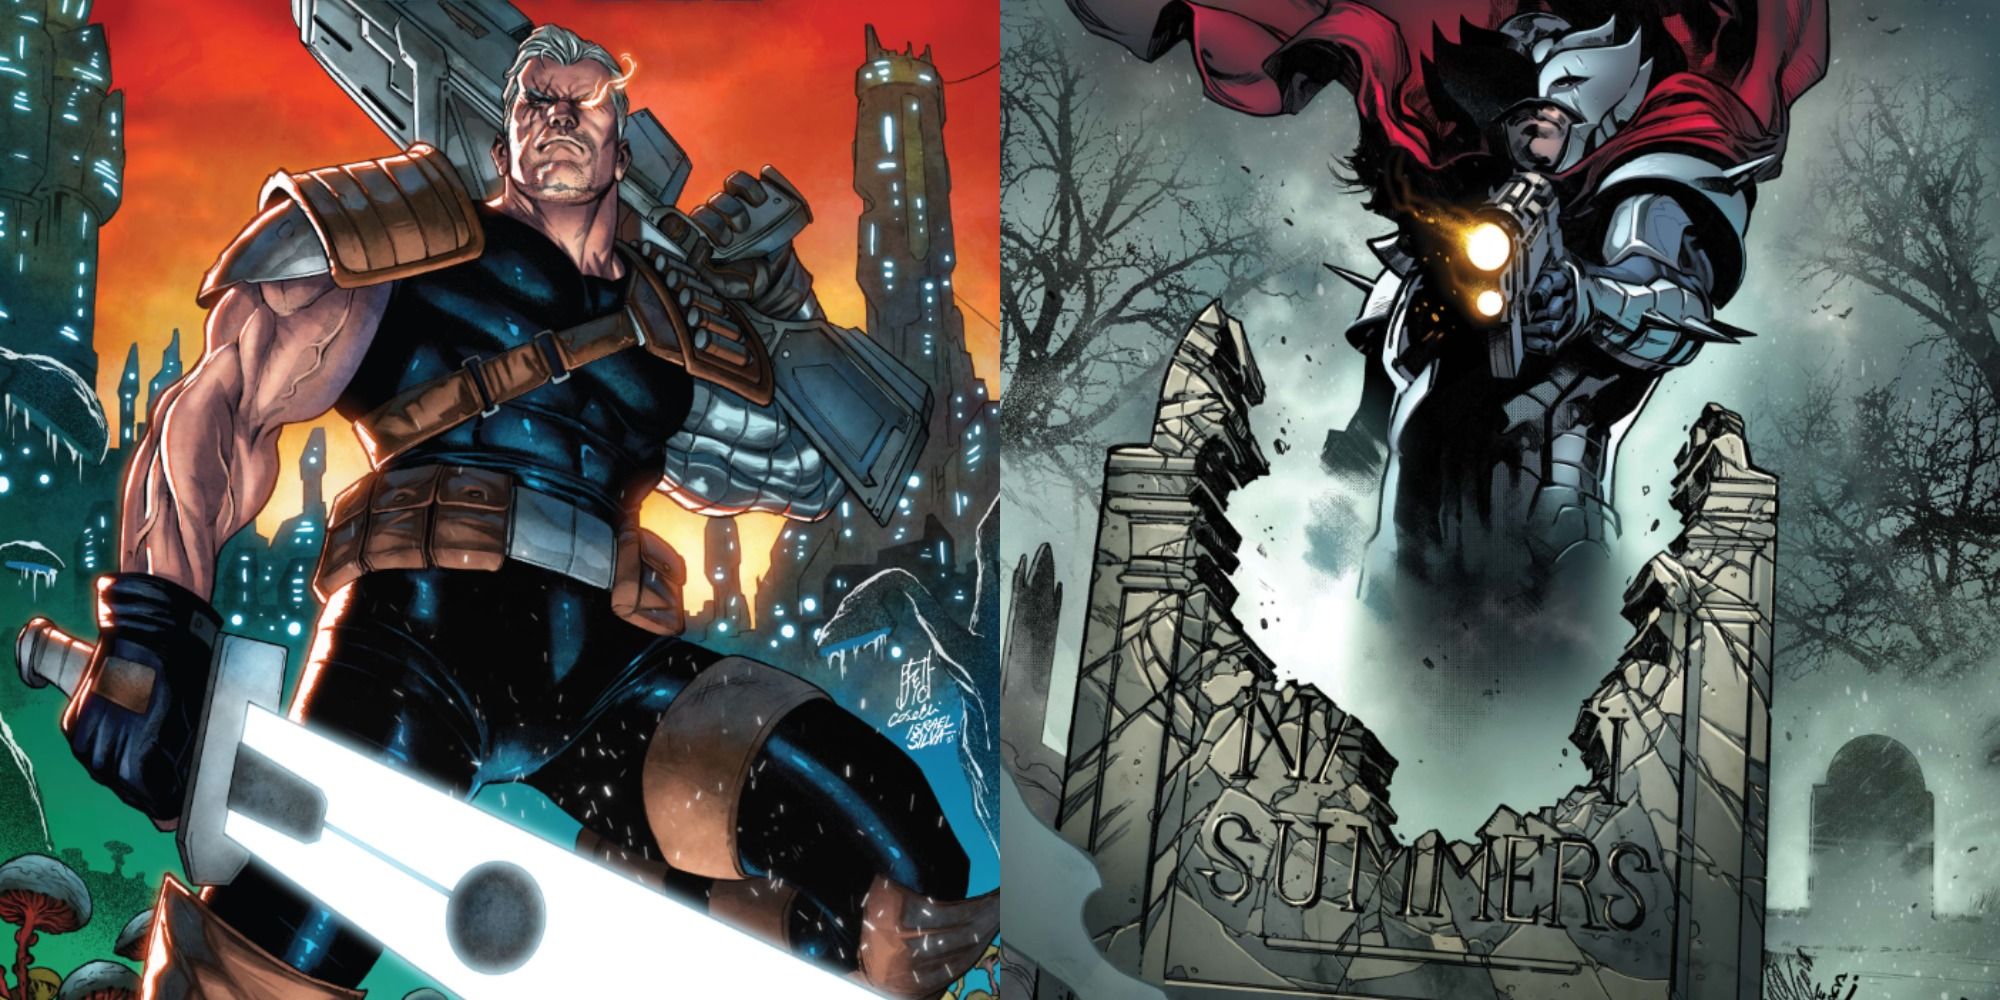 side by side image of Cable with a big gun and sword and his clone Stryfe from Marvel Comics